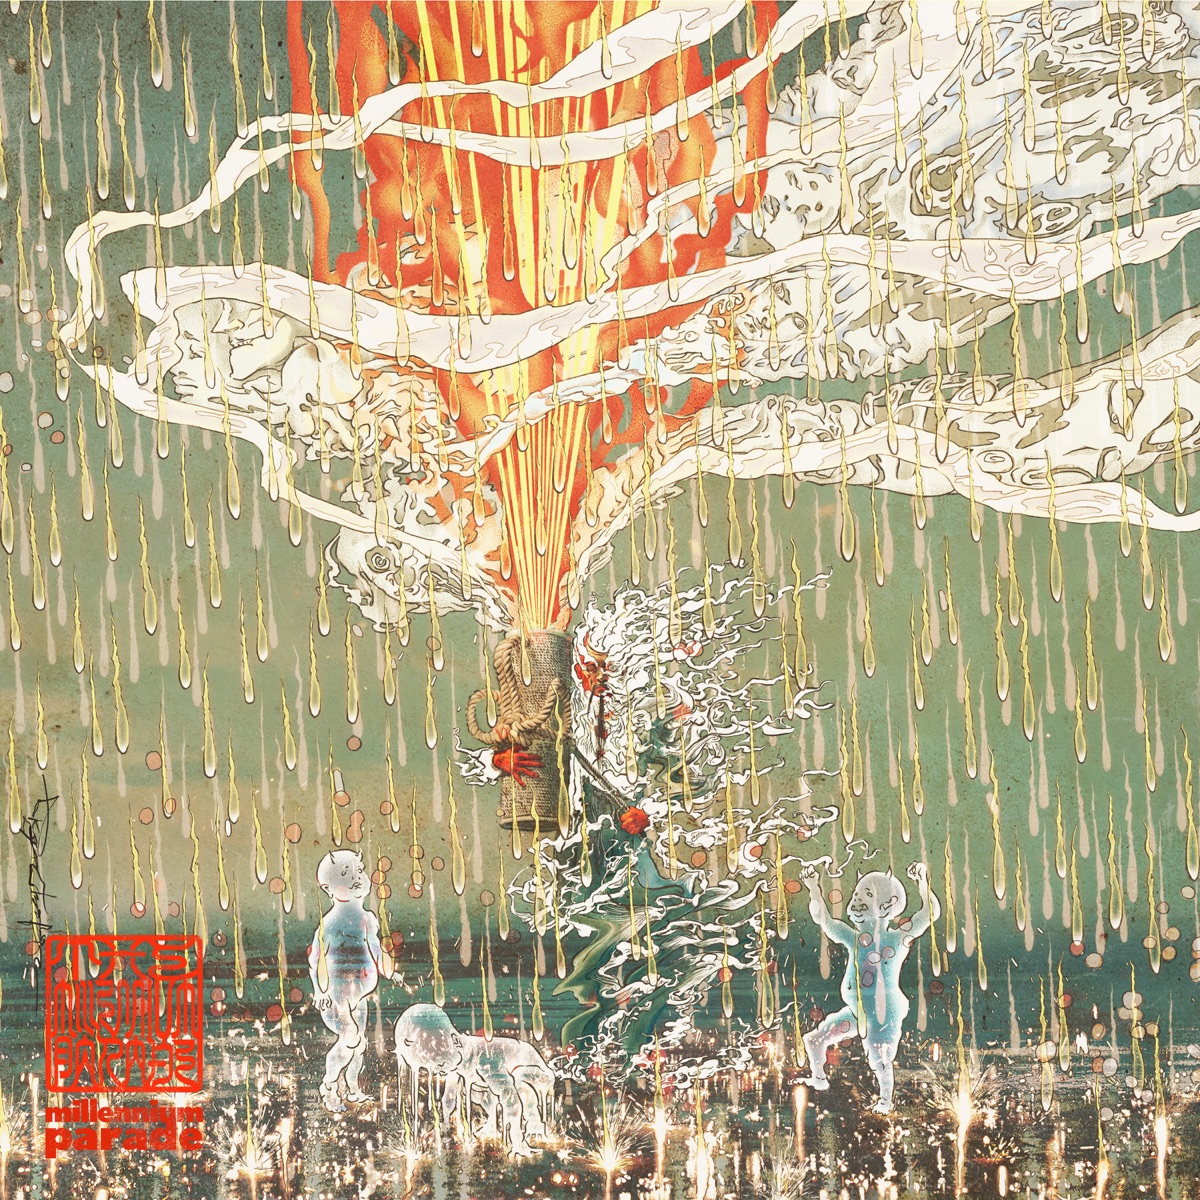 『millennium parade - Fireworks and Flying Sparks』収録の『THE MILLENNIUM PARADE』ジャケット